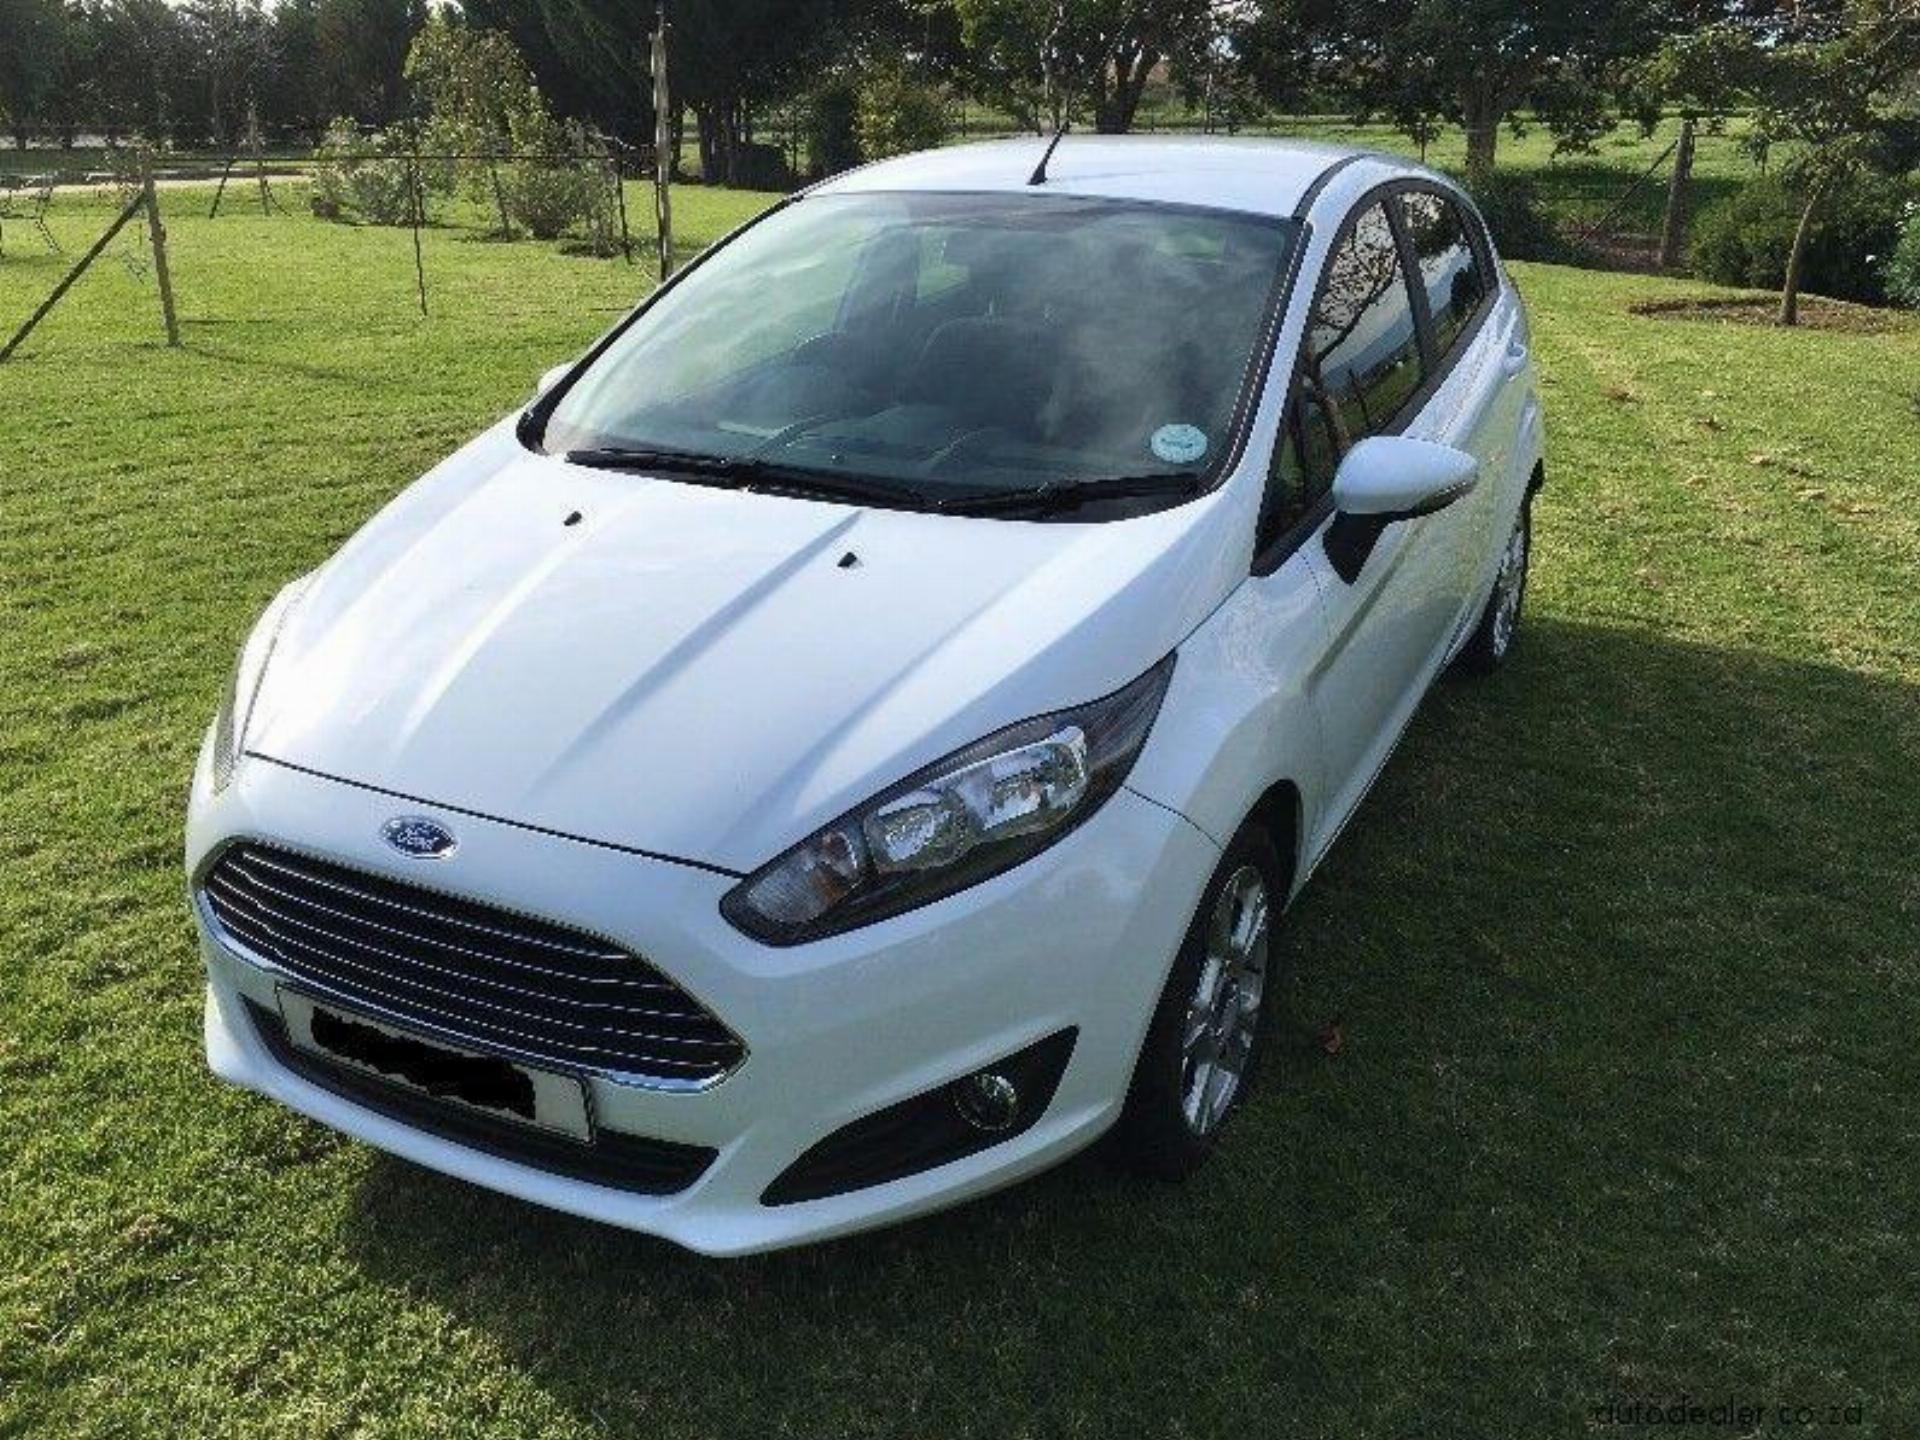 Ford Fiesta 1.4 Trend 5DR